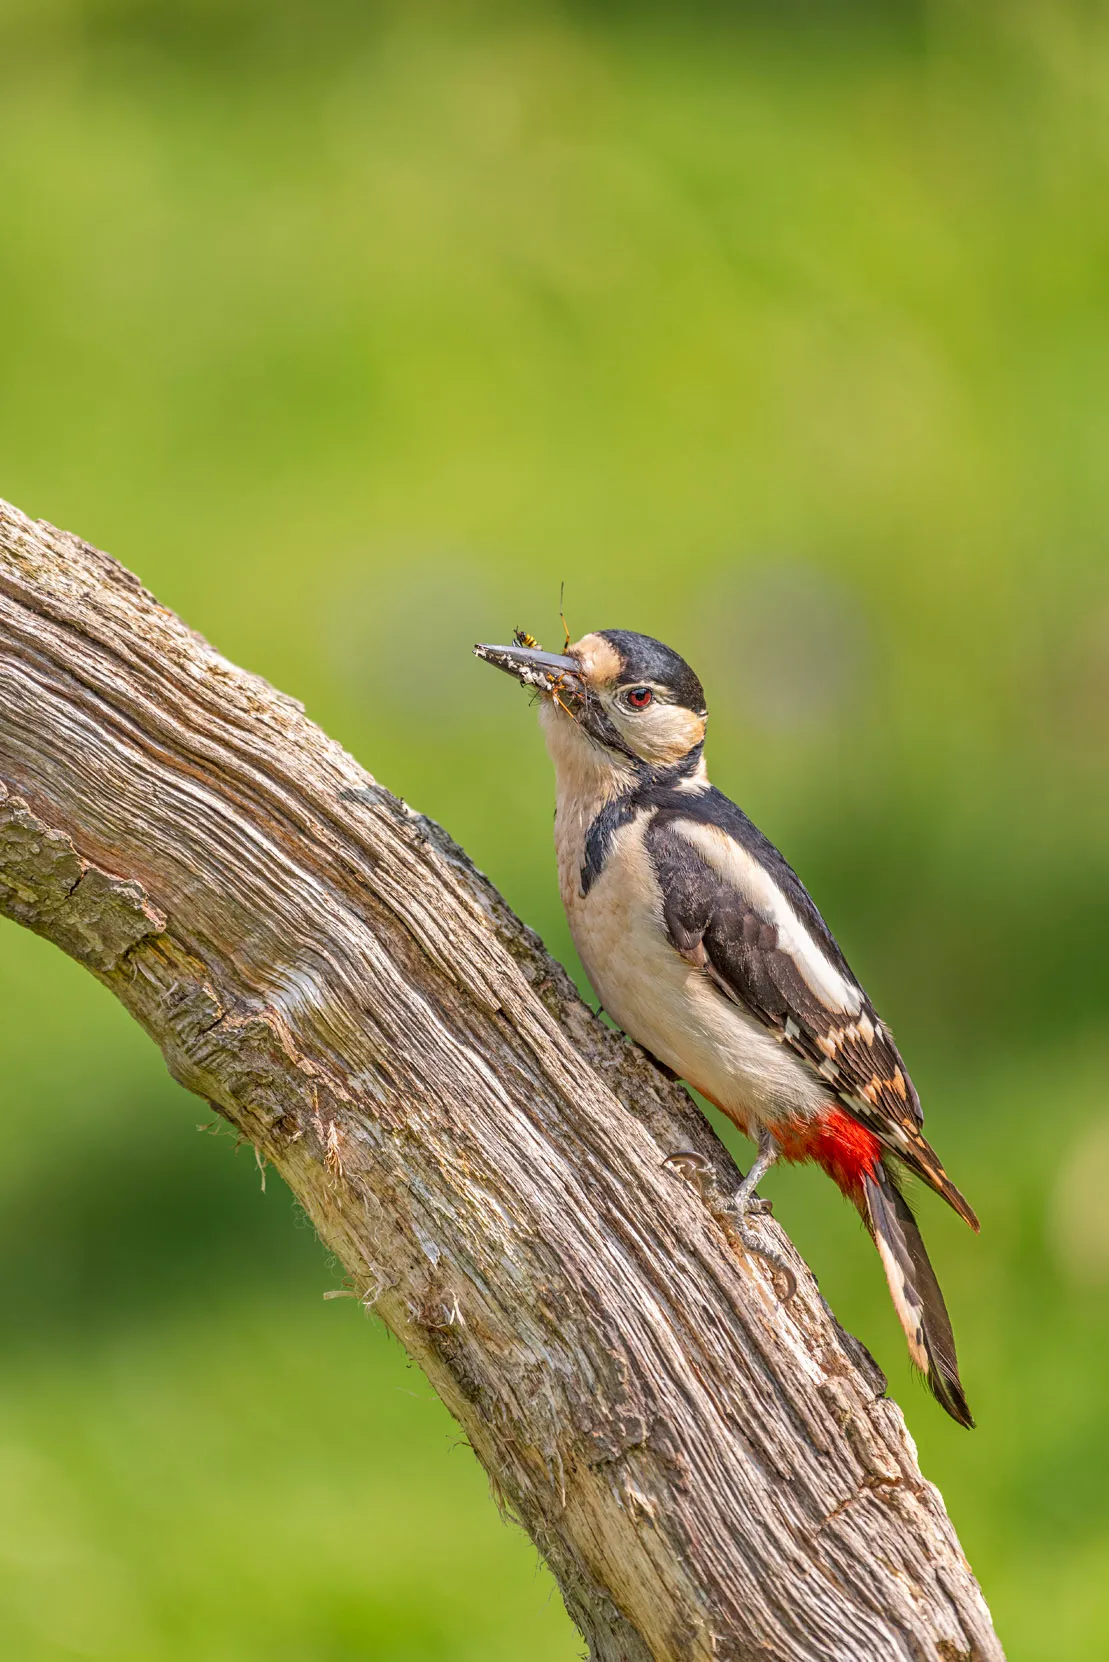 Great Spotted Woodpecker perched on a thick, upstanding branch with an insect in its beak